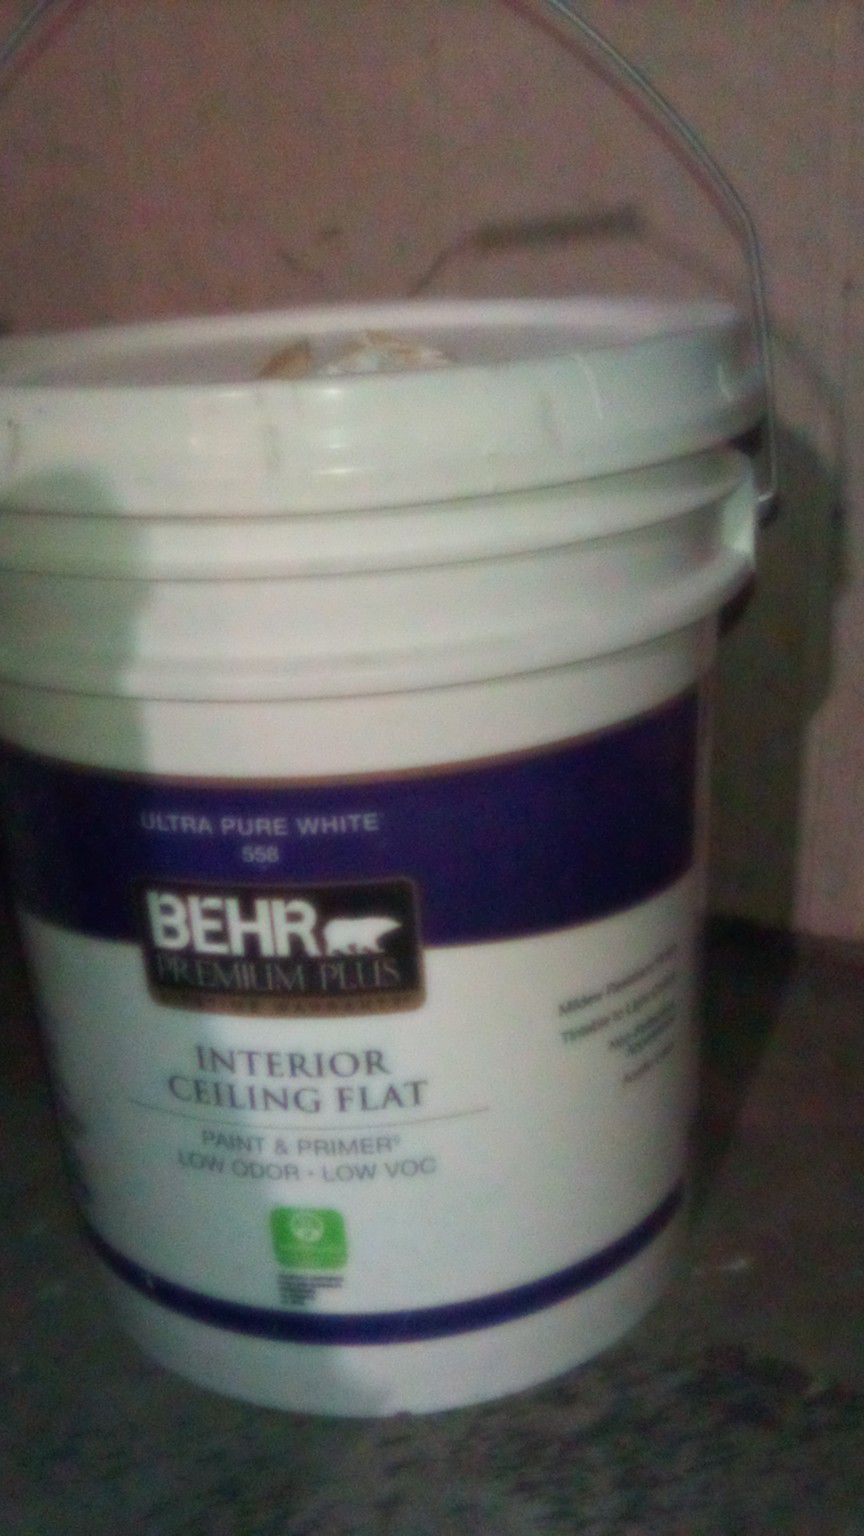 Behr 5 Gallon White Paint 2 For 100$